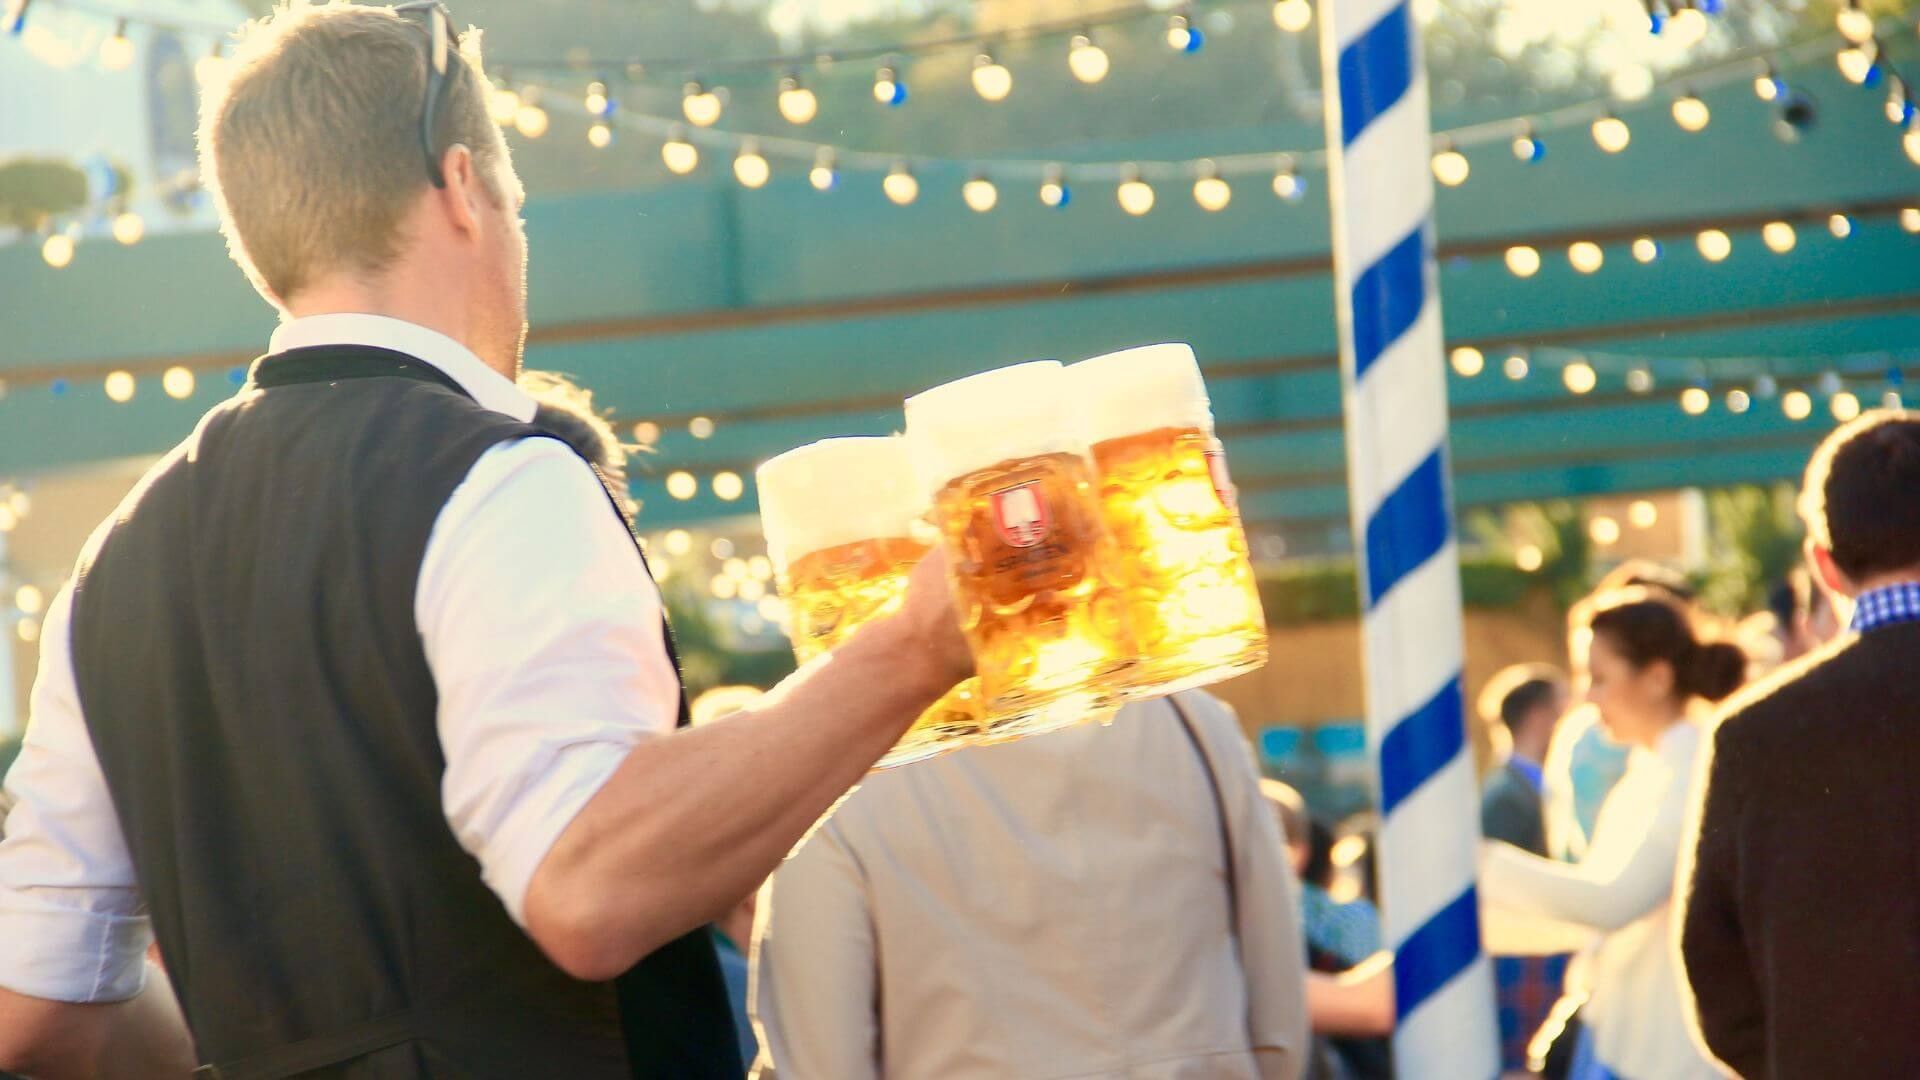 Waiter holding multiple steins of beer serving to crowd with lights hanging above